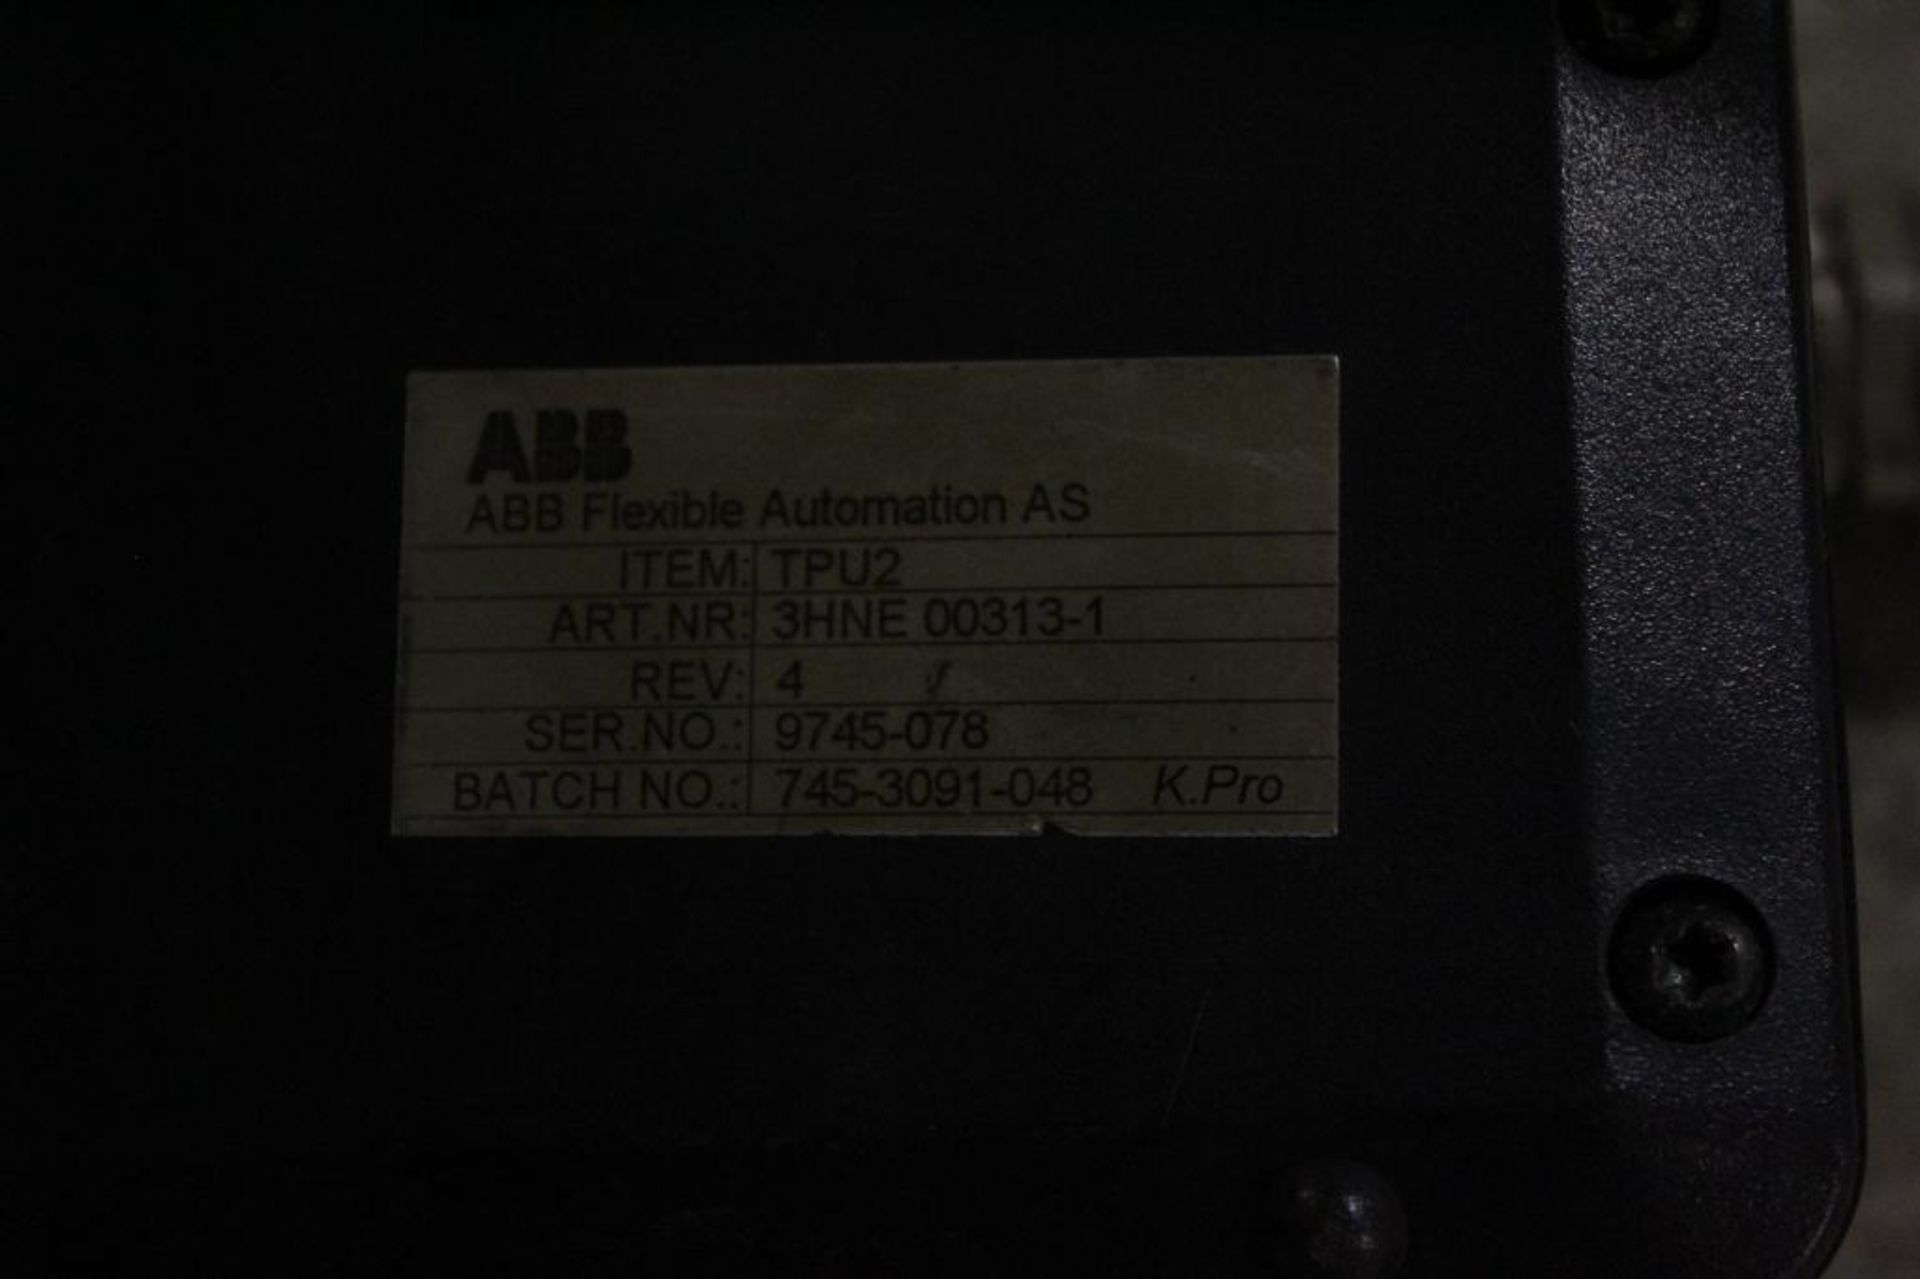 ABB 3HNE 00313-1 Teach Pendant *Screen Scratches* - Image 2 of 2